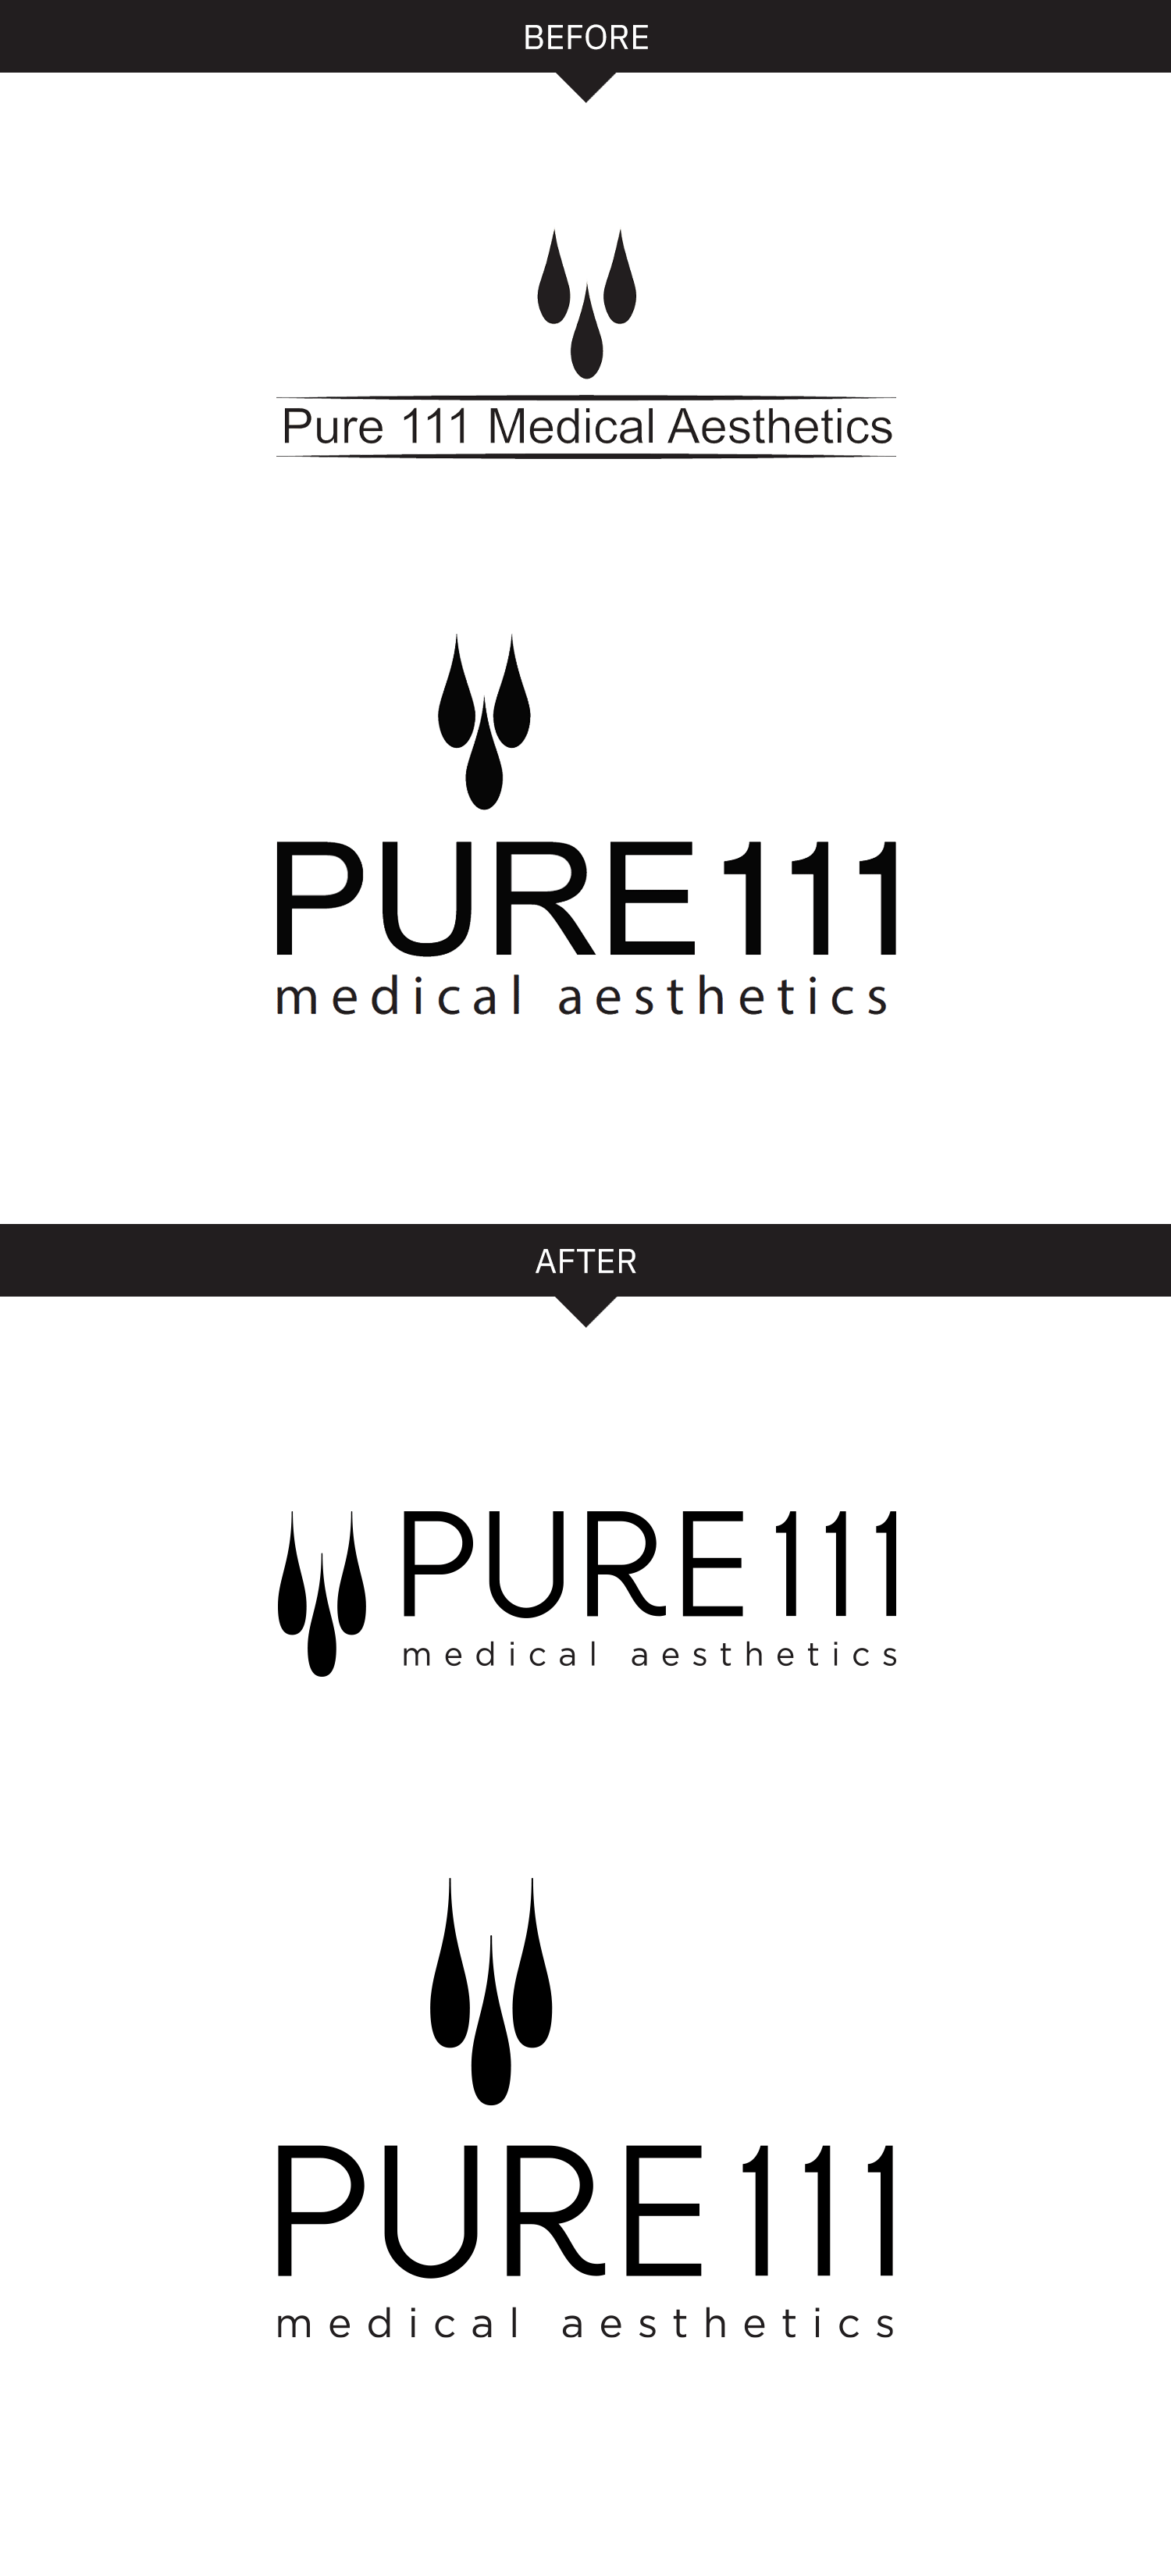 Pure 111 Logo: Before & After